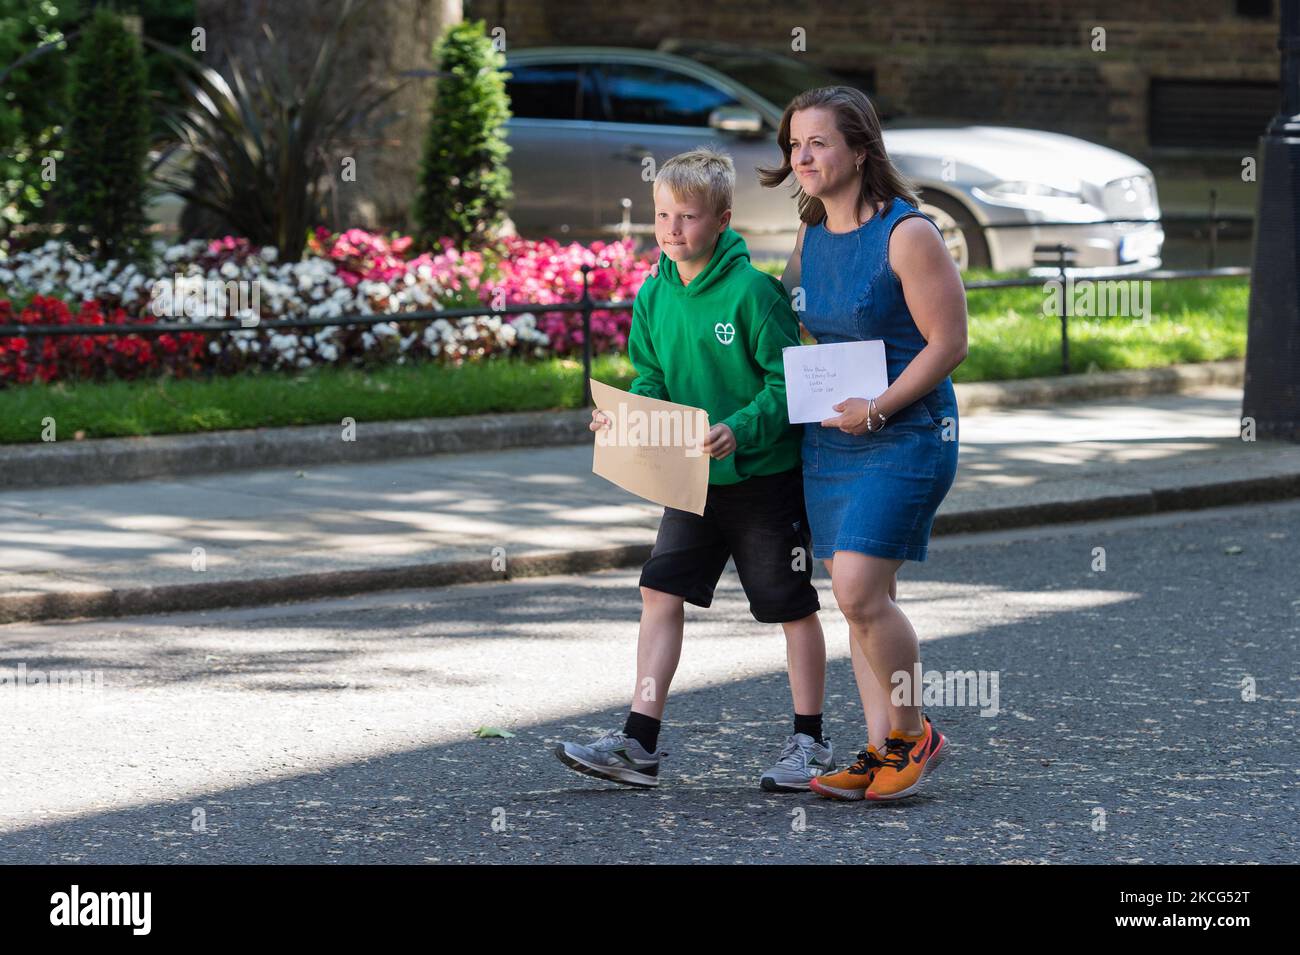 LONDON, UNITED KINGDOM - JUNE 16, 2021: Thomas Braun, 9, and his mother Ilmarie Braun deliver a letter addressed to British Prime Minister Boris Johnson at 10 Downing Street asking for help in getting a medical cannabis prescription for a severely epileptic Thomas's younger brother Eddie, 3, who can suffer up to 100 seizures a day, on June 16, 2021 in London, England. The use of cannabis-based medicinal products with a prescription was made legal in 2018 for those with exceptional clinical needs but since then the NHS issued only a handful of prescriptions forcing families to pay thousands of  Stock Photo